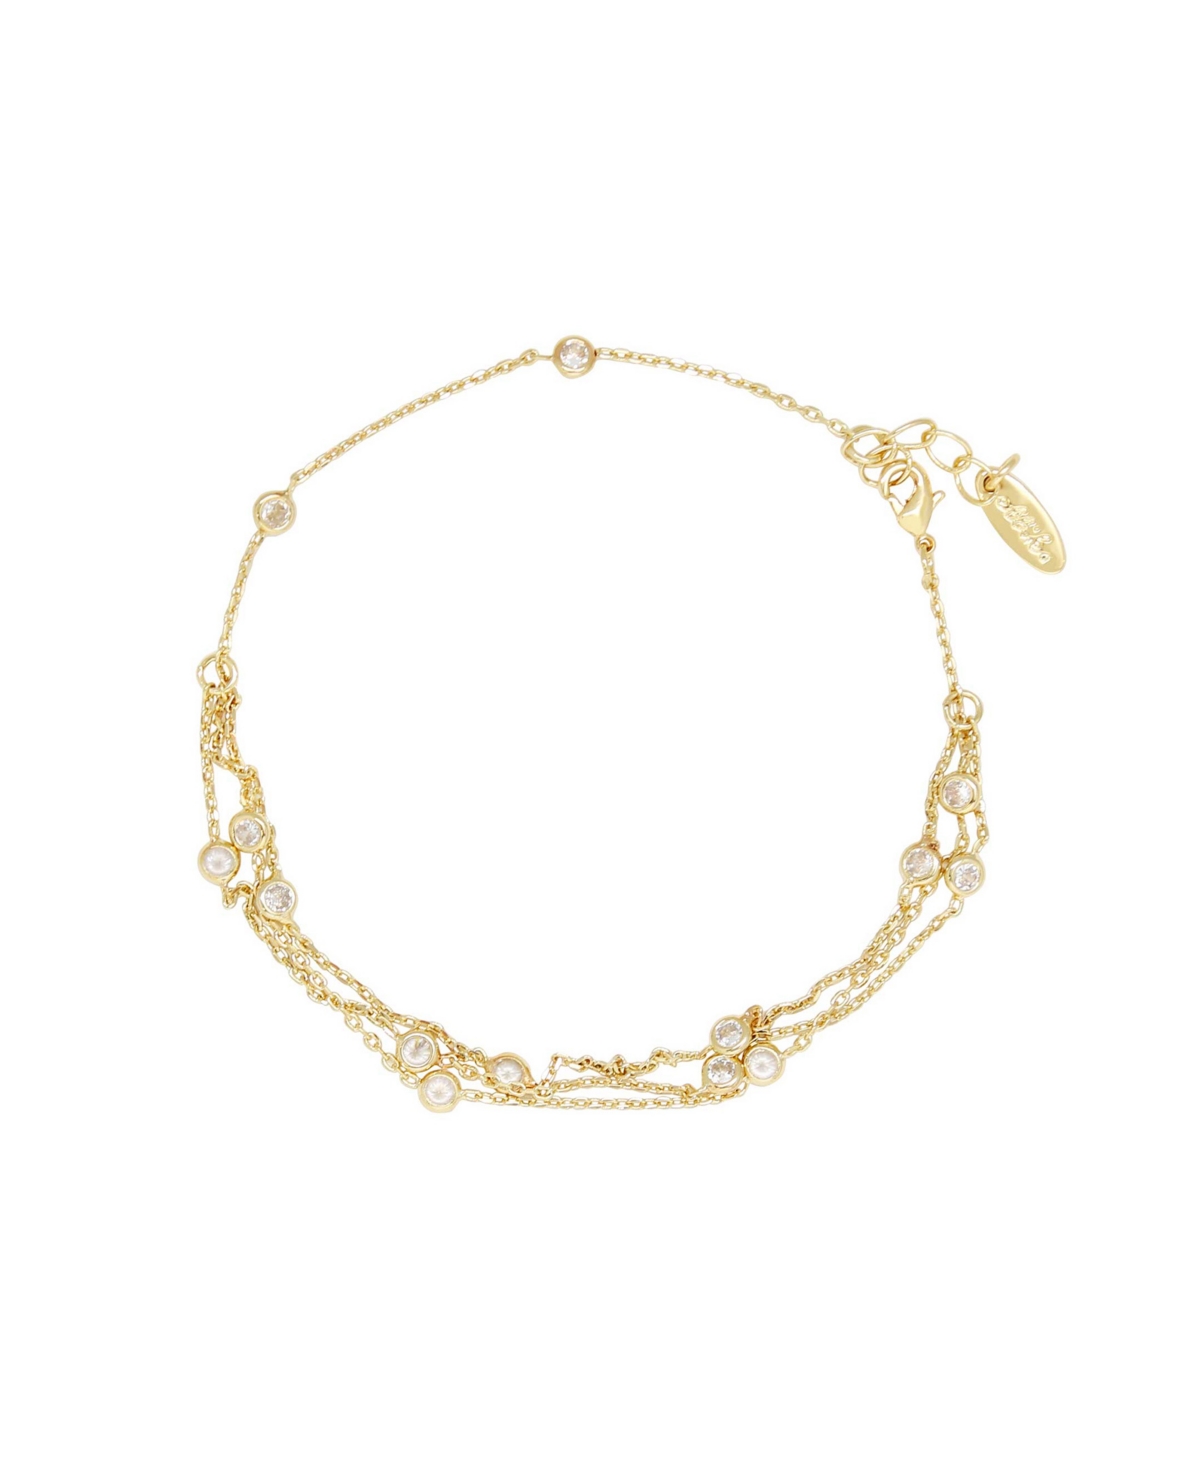 Fine Details Gold Plated Chain Cubic Zirconia Anklet - Gold Plated